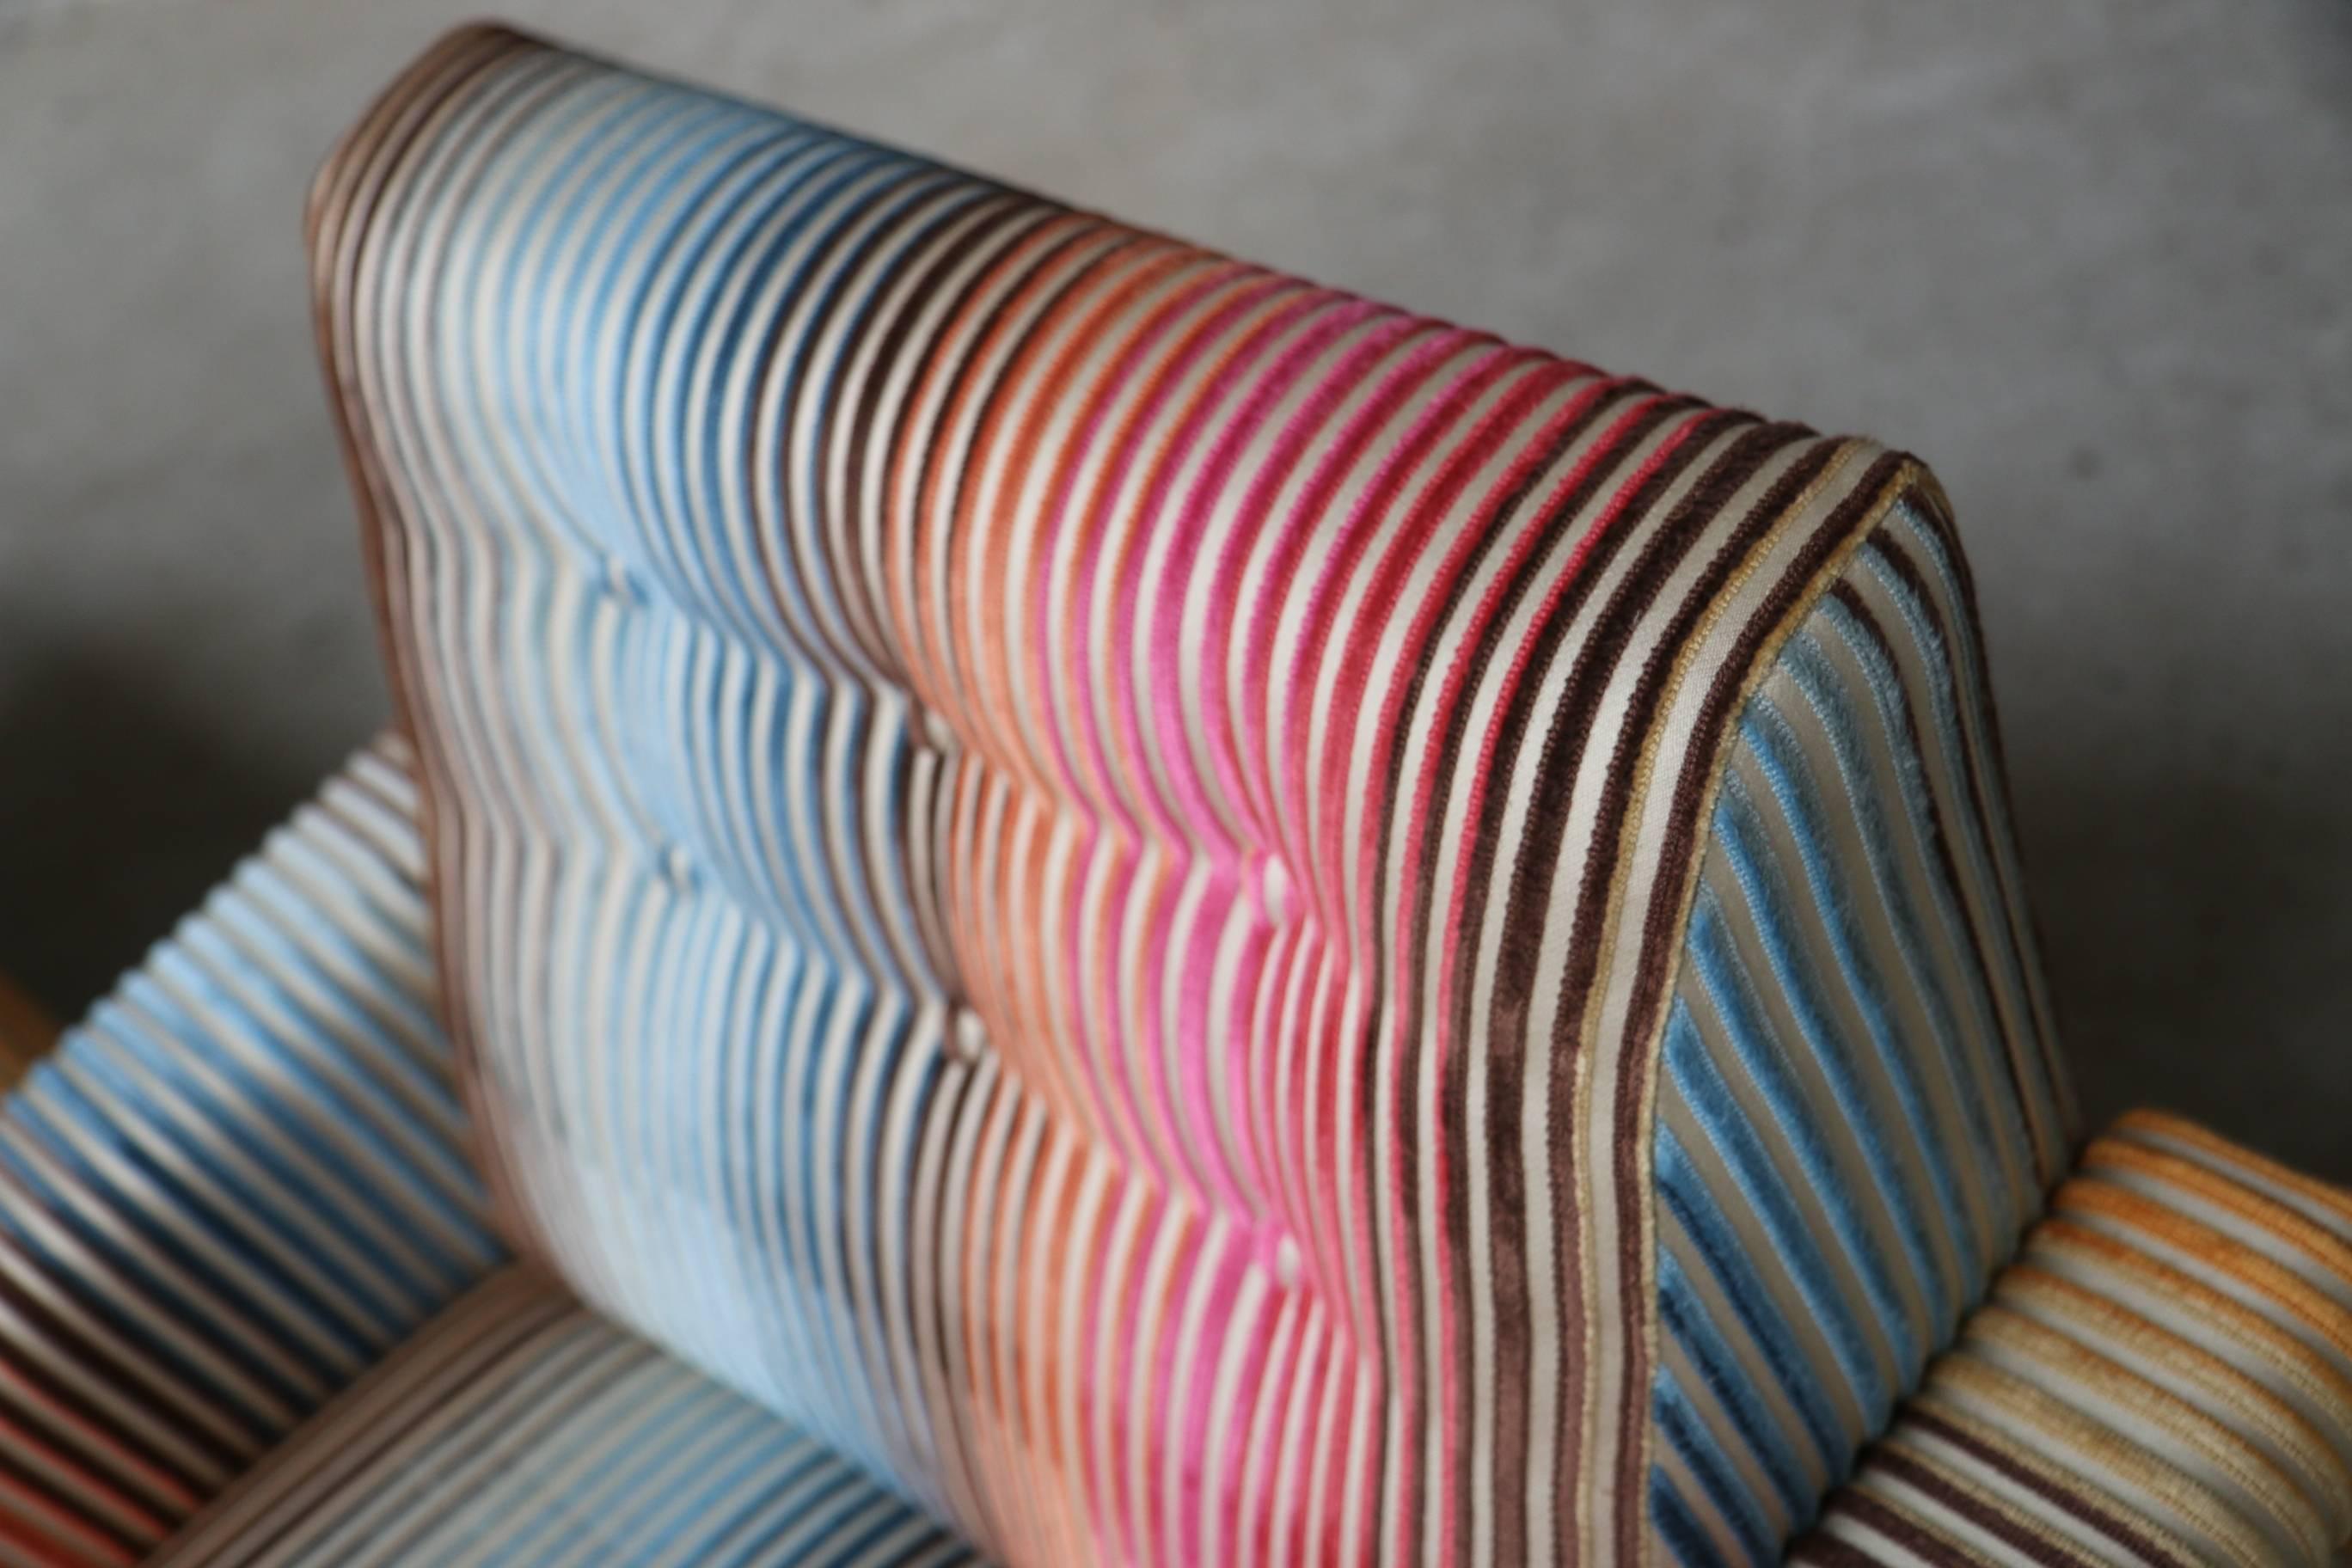 1950s Lounge Armchairs Re-Upholstered in Multicolored Missoni Fabric 3